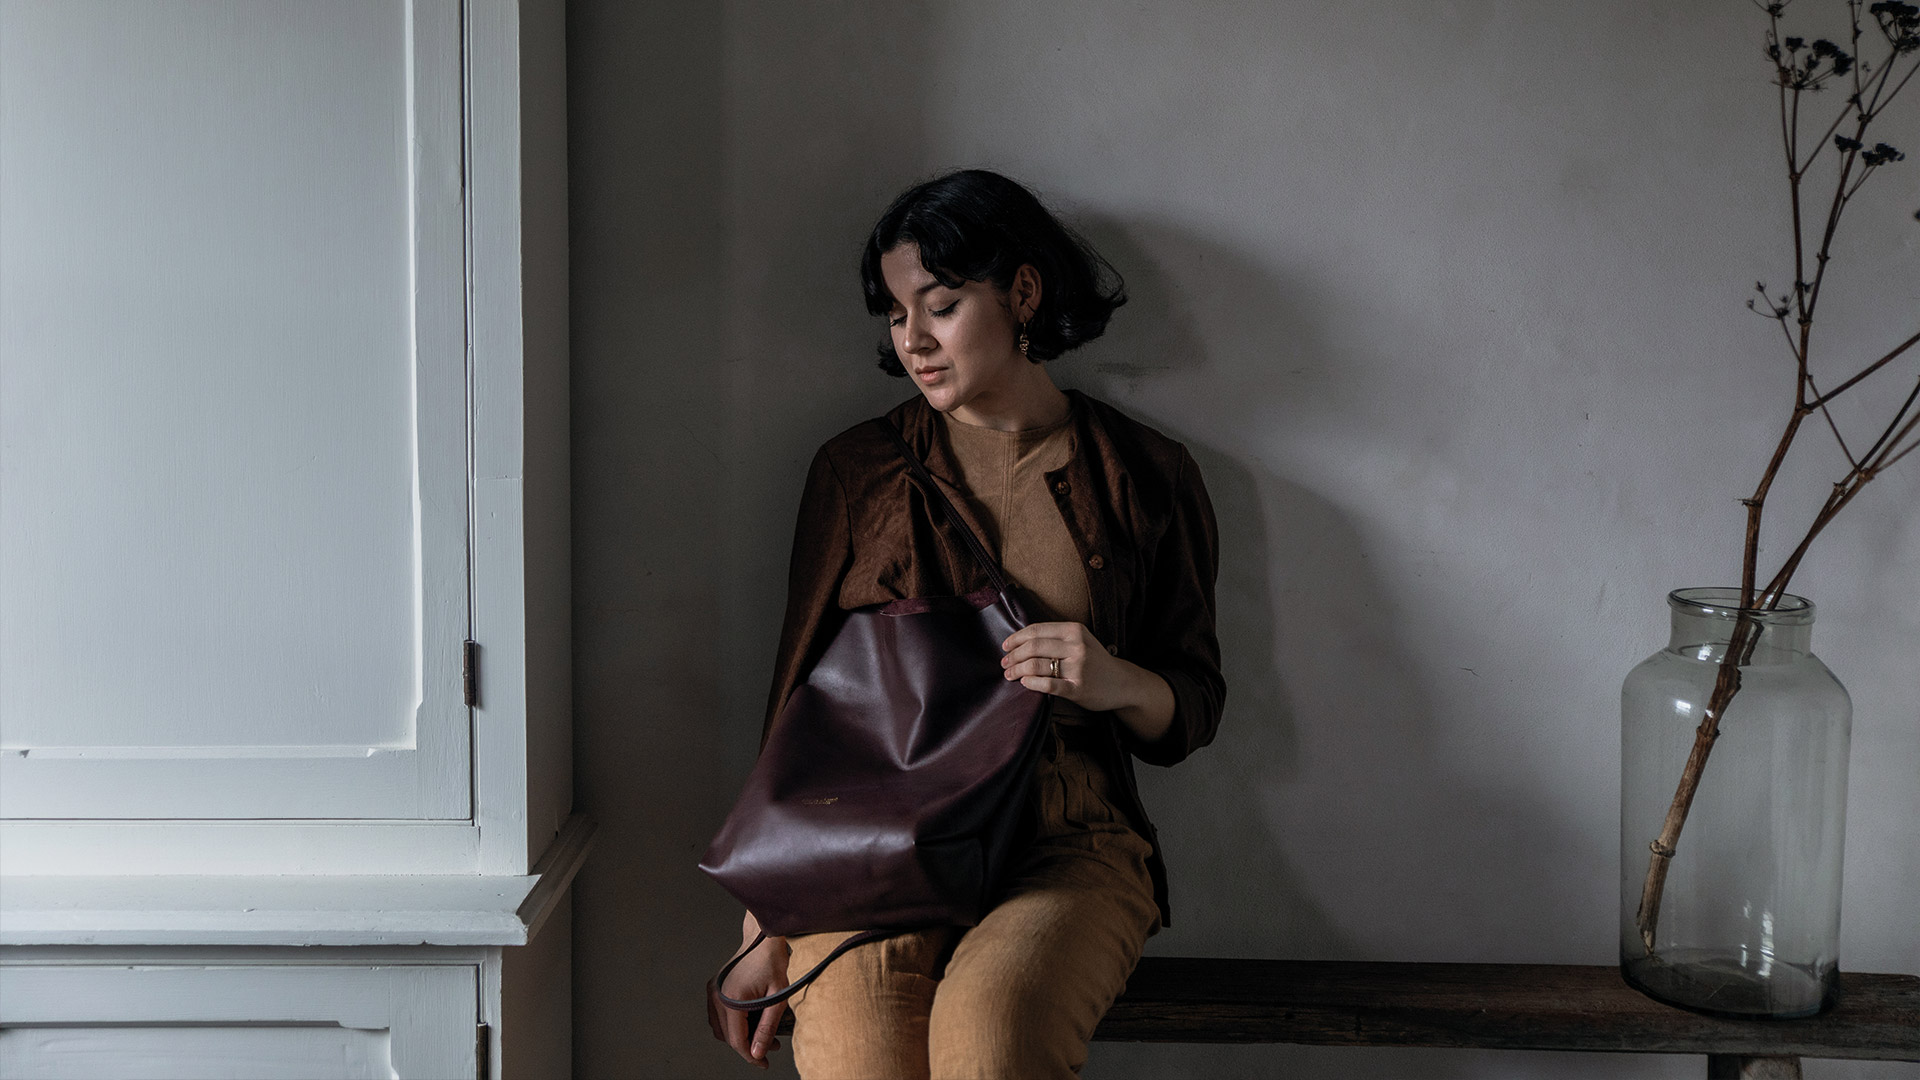 A woman carries the Mission leather bag